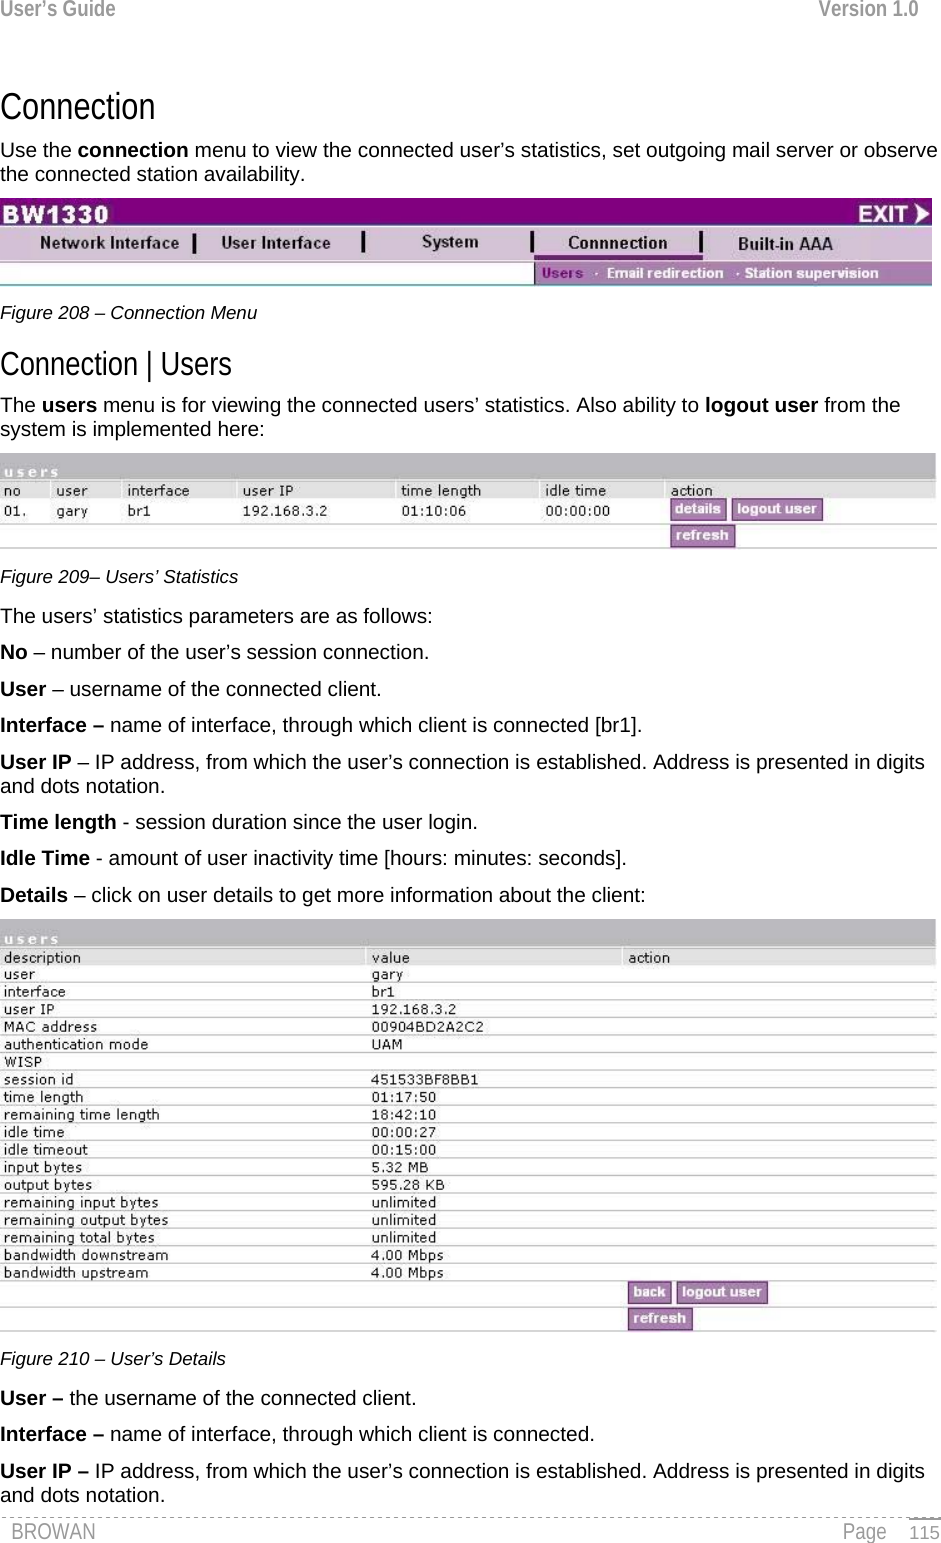 User’s Guide  Version 1.0  Connection  Use the connection menu to view the connected user’s statistics, set outgoing mail server or observe the connected station availability.  Figure 208 – Connection Menu Connection | Users  The users menu is for viewing the connected users’ statistics. Also ability to logout user from the system is implemented here:  Figure 209– Users’ Statistics The users’ statistics parameters are as follows: No – number of the user’s session connection. User – username of the connected client. Interface – name of interface, through which client is connected [br1]. User IP – IP address, from which the user’s connection is established. Address is presented in digits and dots notation. Time length - session duration since the user login. Idle Time - amount of user inactivity time [hours: minutes: seconds]. Details – click on user details to get more information about the client:  Figure 210 – User’s Details User – the username of the connected client. Interface – name of interface, through which client is connected. User IP – IP address, from which the user’s connection is established. Address is presented in digits and dots notation. BROWAN                                                                                                                                               Page   115